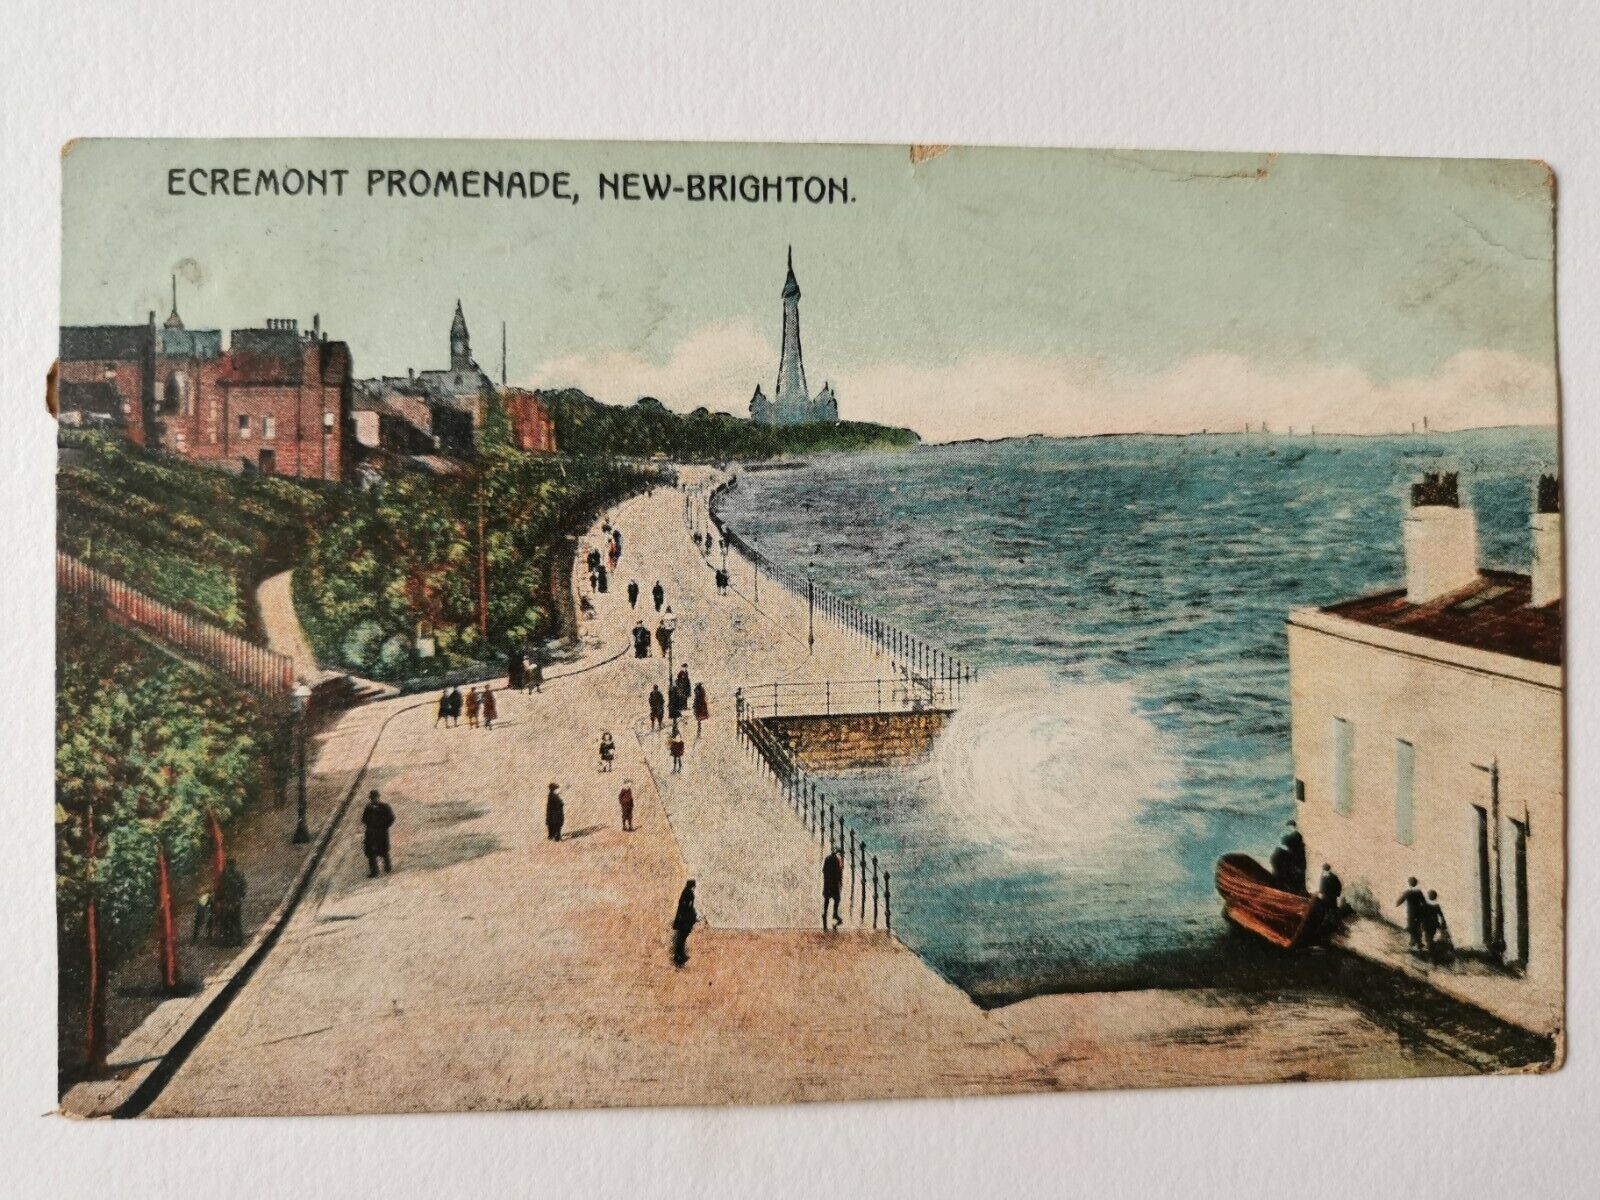 House Clearance - Vintage Service - Egremont Promenade. New Brighton - Posted 1909. Merseyside